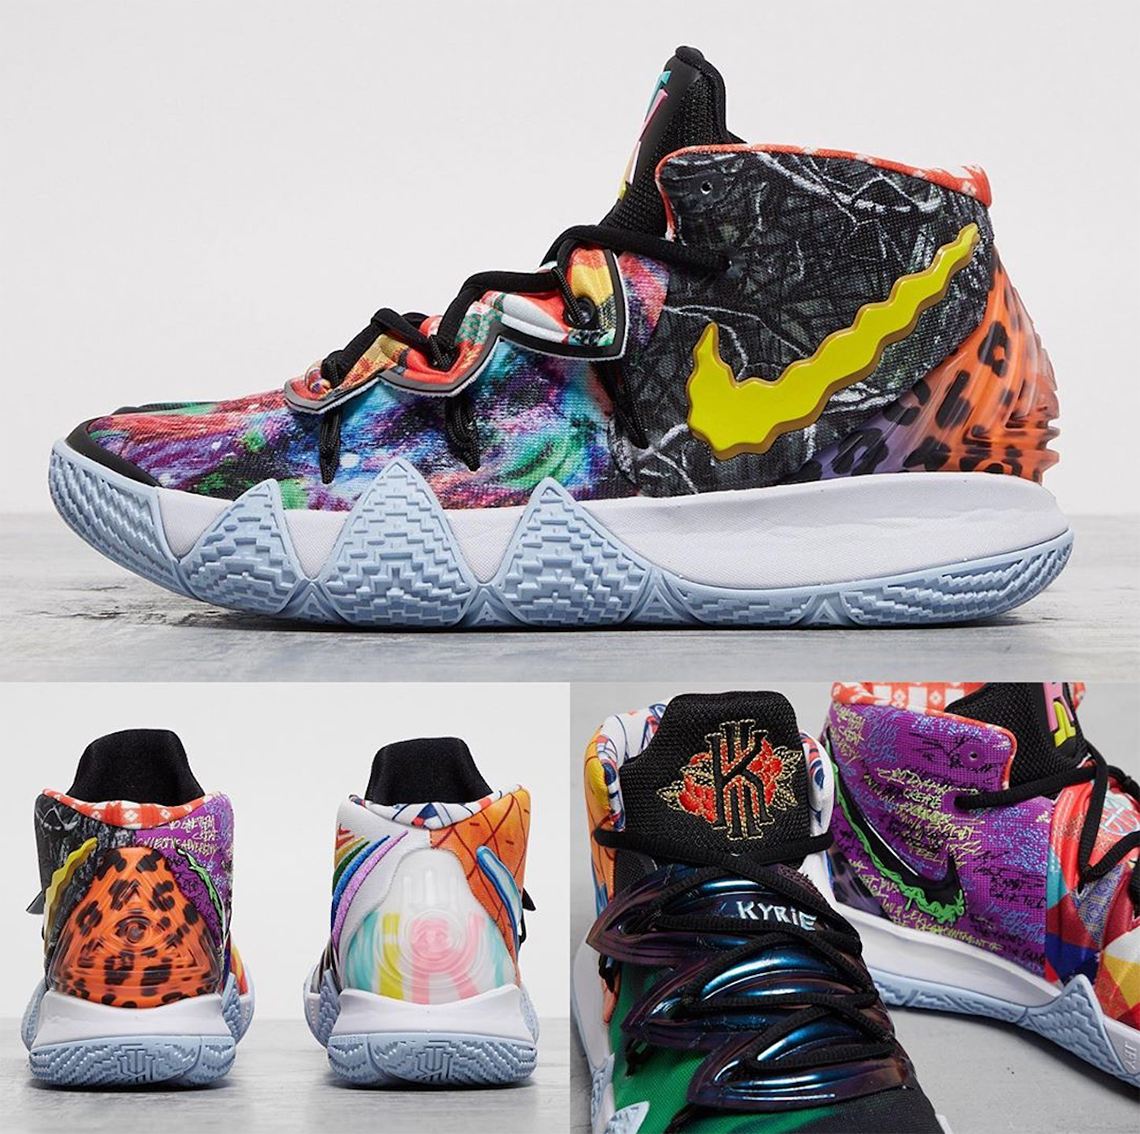 What The Kyrie Nike Kybrid S2 3